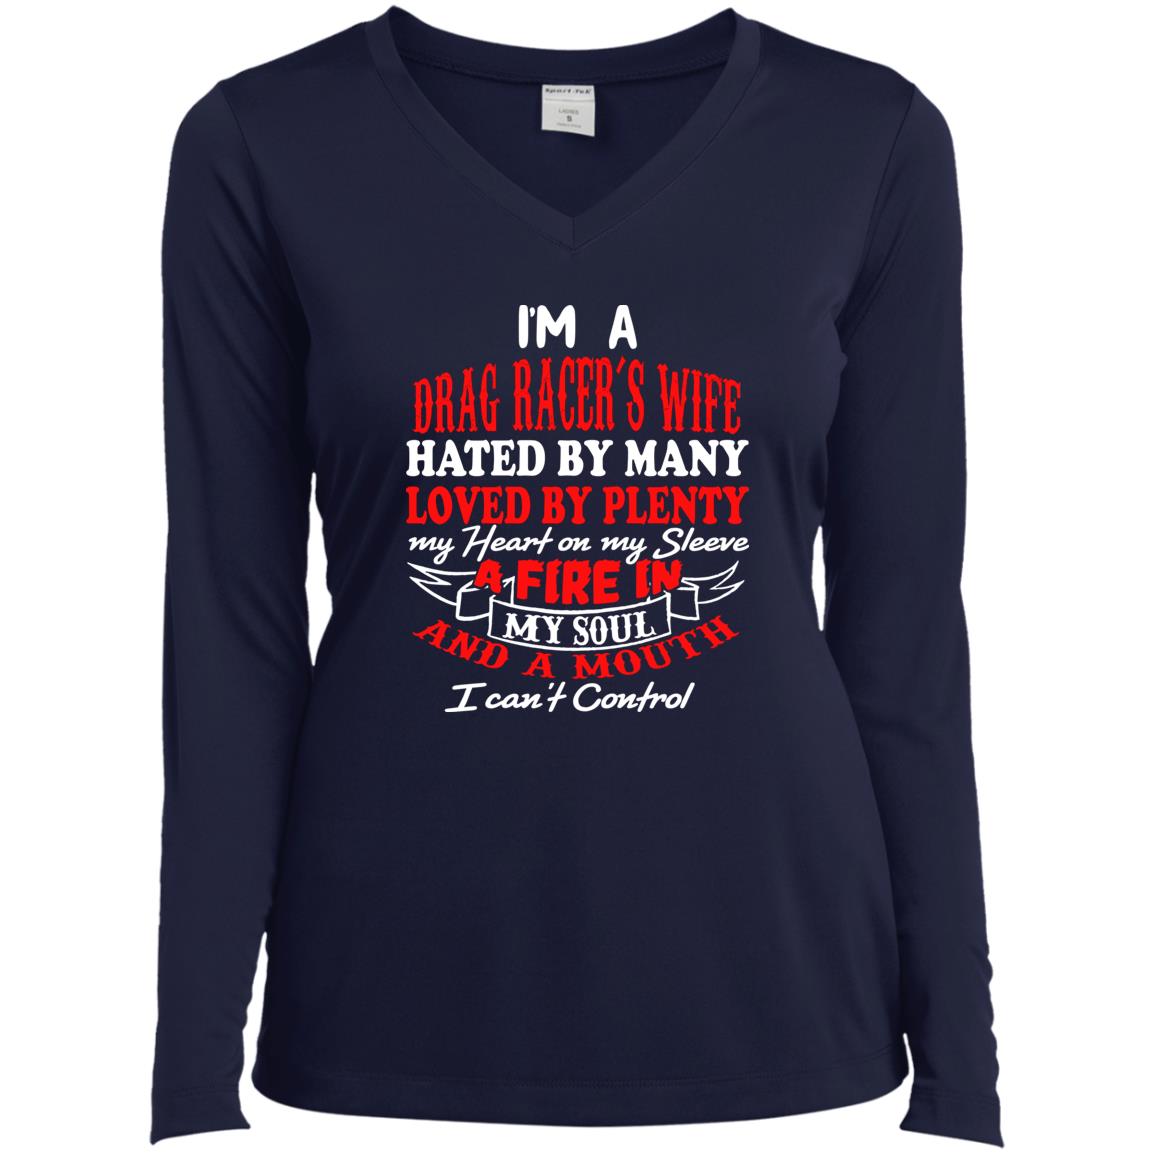 I'm A Drag Racer's Wife Hated By Many Loved By Plenty Ladies’ Long Sleeve Performance V-Neck Tee